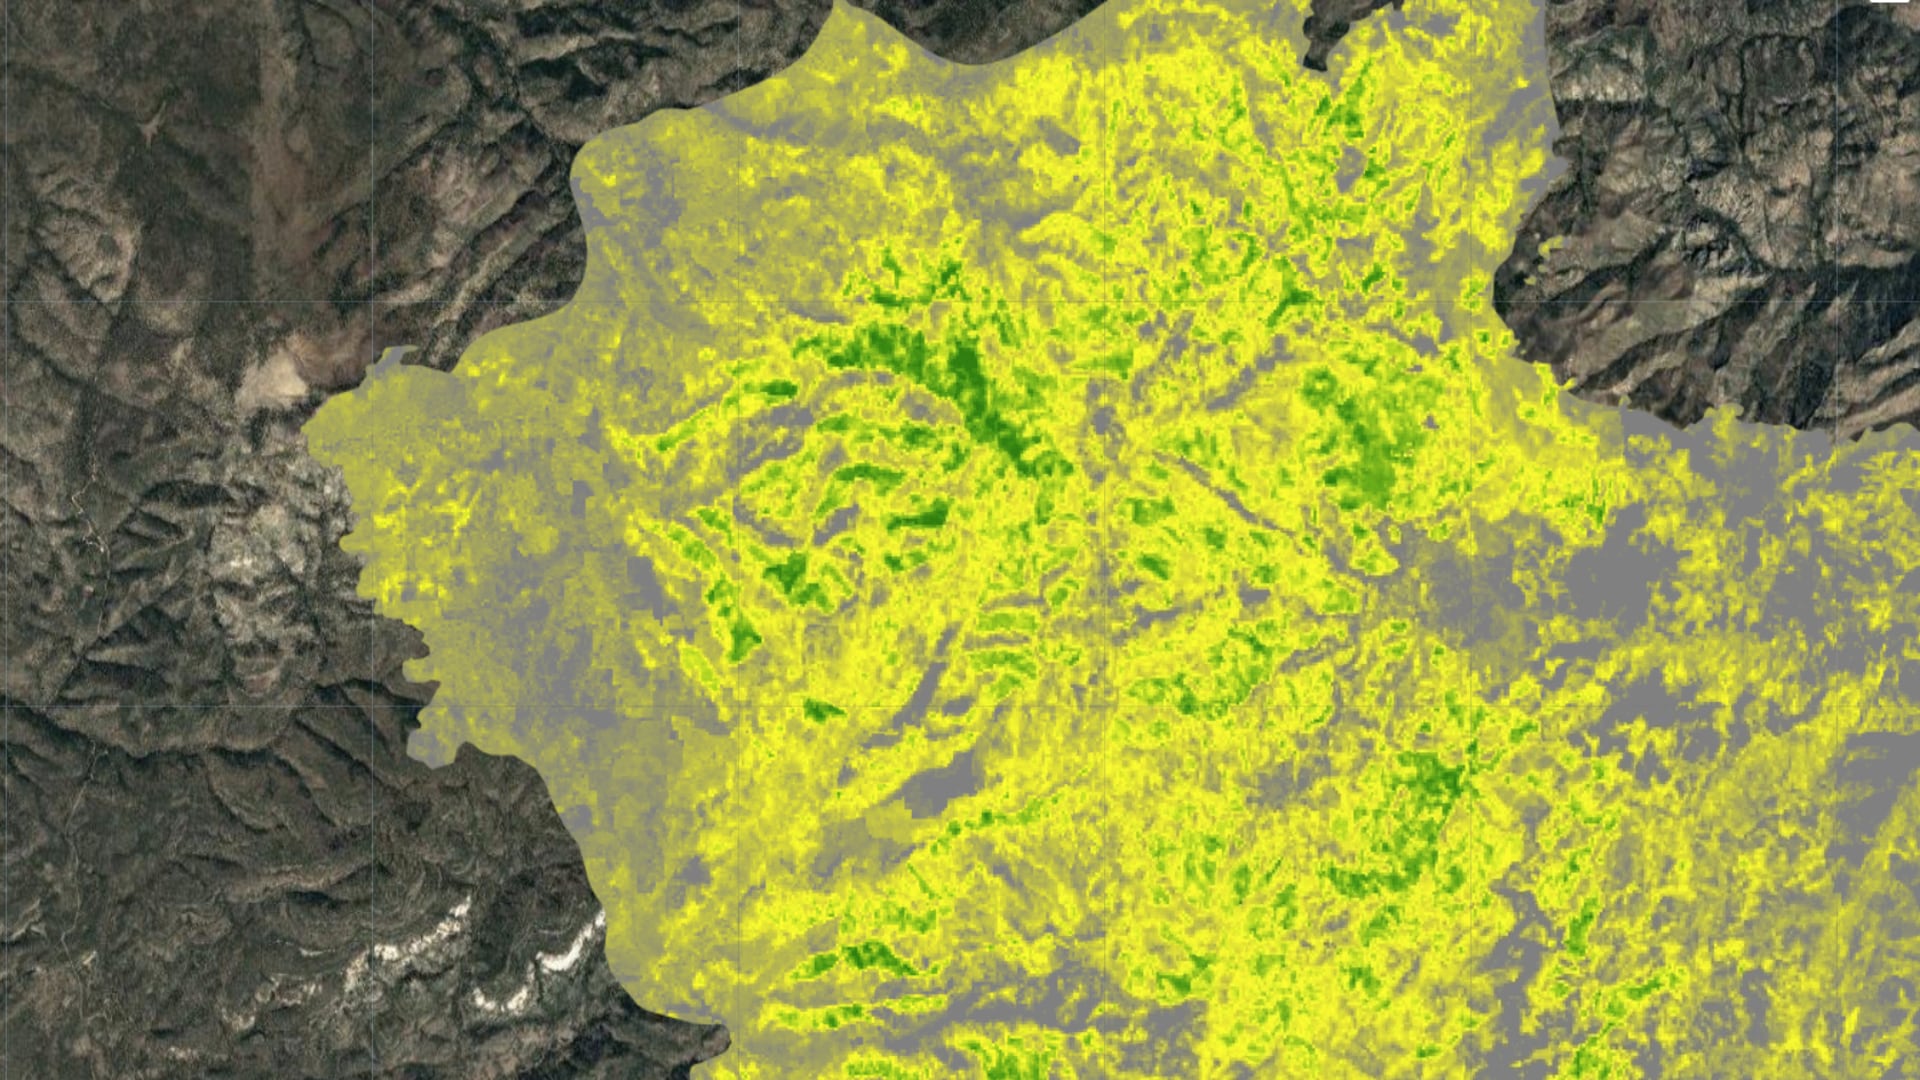 Difference Normalized Burn Ratio (dNBR) imagery showing the change in NBR from 2013 to 2019. Imagery was derived processed Landsat 7 ETM+ and Landsat 8 OLI data for the Silver Fire in the Gila National Forest. High dNBR represents healthy vegetation, shown in green. Low dNBR represents unhealthy, shown in gray. dNBR values indicate how the landscape has recovered postfire, which aids Burned Area Emergency Response (BAER) teams in future treatment applications.   Keywords: Normalized Burn Ratio, Gila National Forest, New Mexico, Silver fire, wildfire, Landsat, BAER